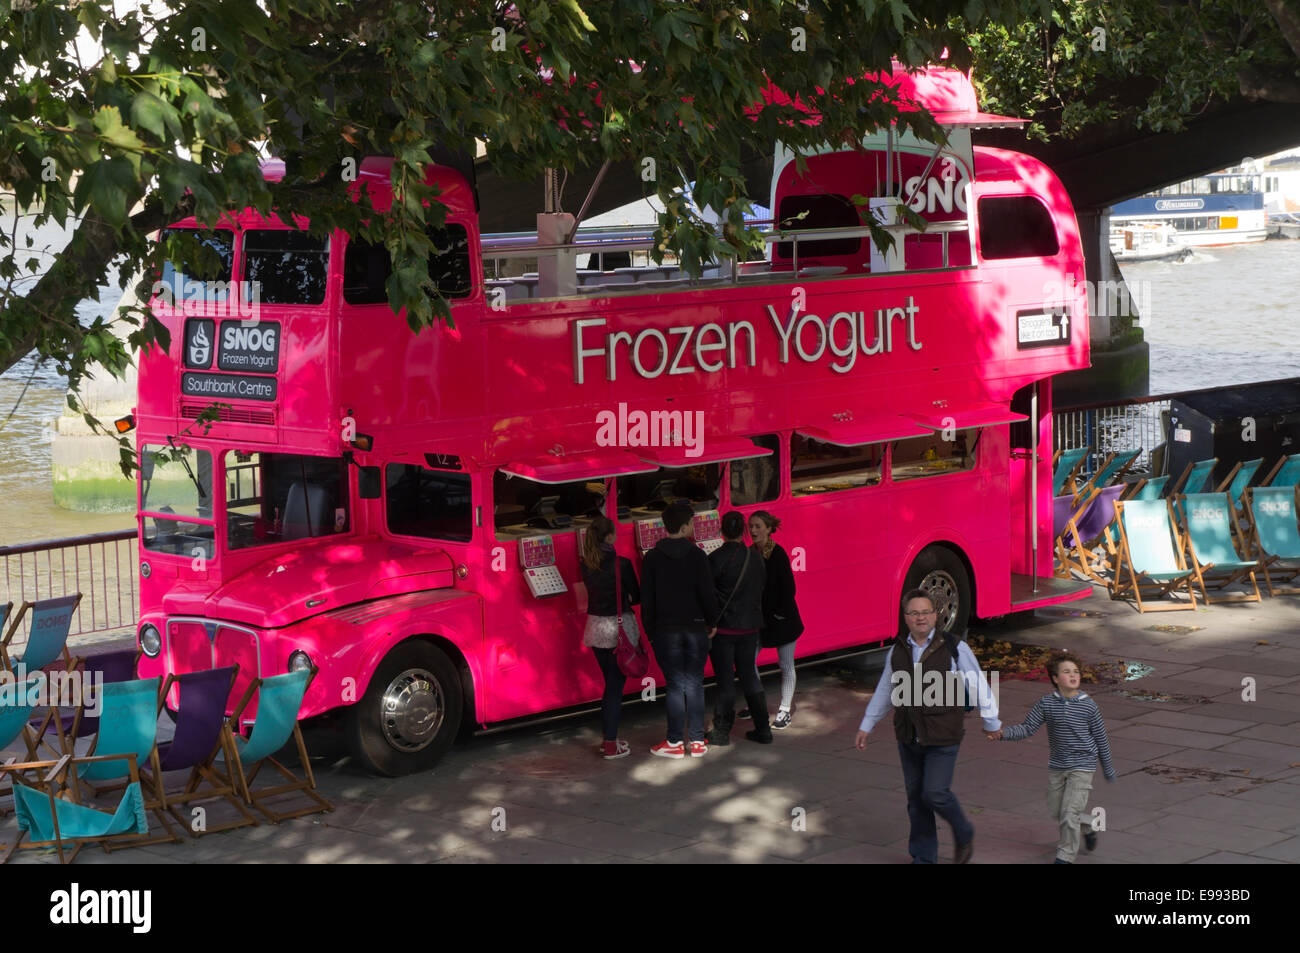 A pink double-decker bus selling Snog frozen yogurt on the Southbank in London. Stock Photo